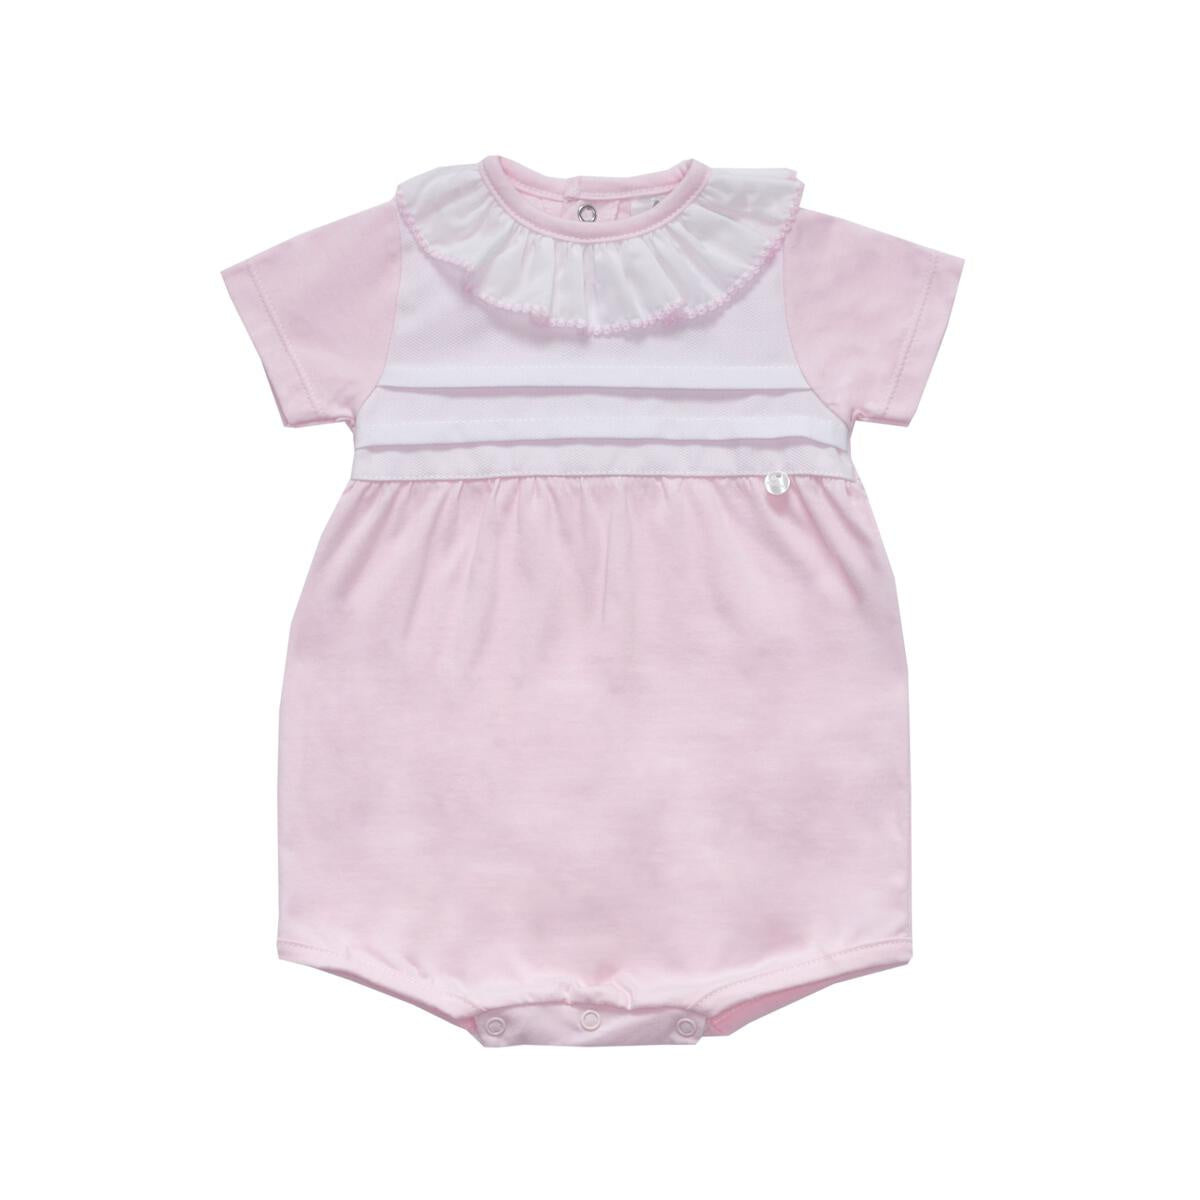 Marco & lizzy Baby Girl Pink/White Romper MN-9086 5104